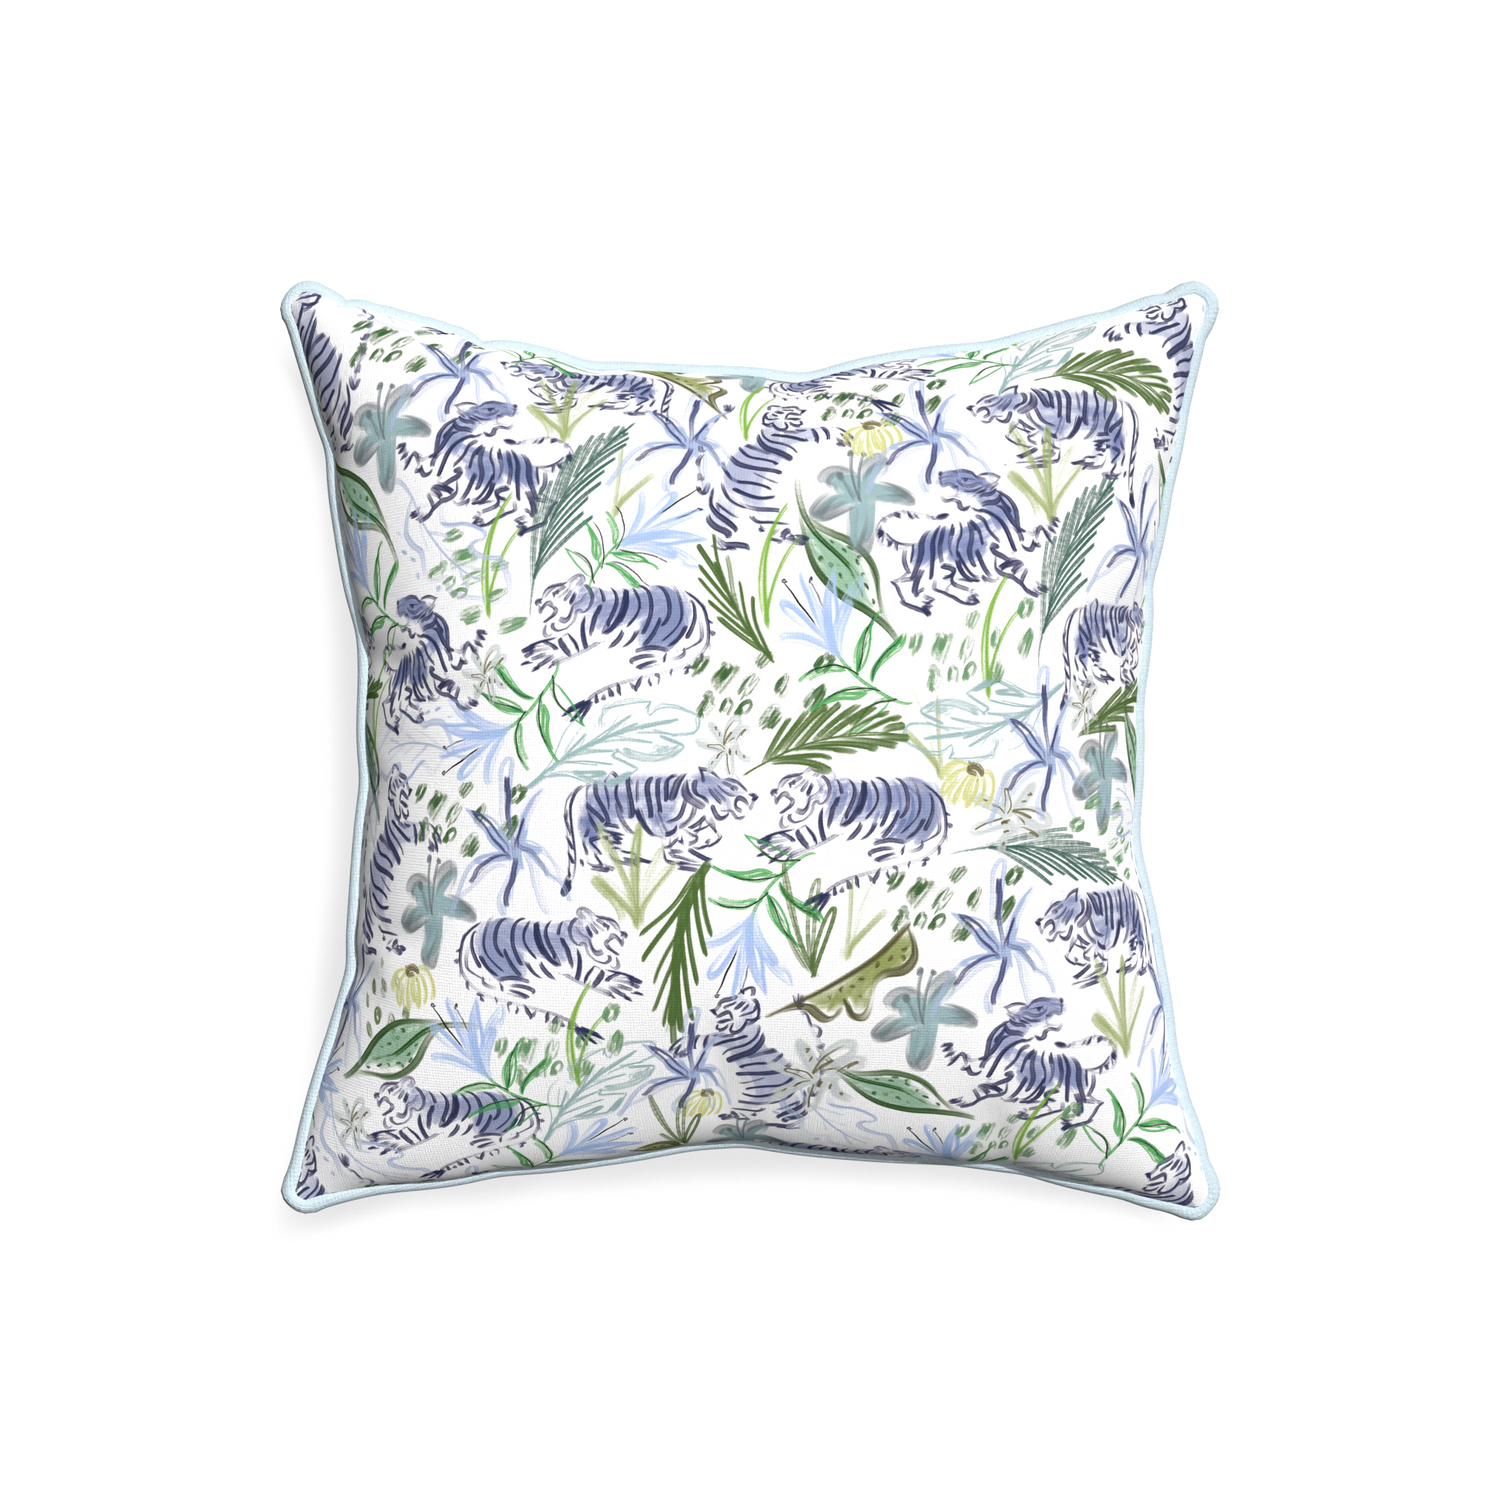 20-square frida green custom pillow with powder piping on white background